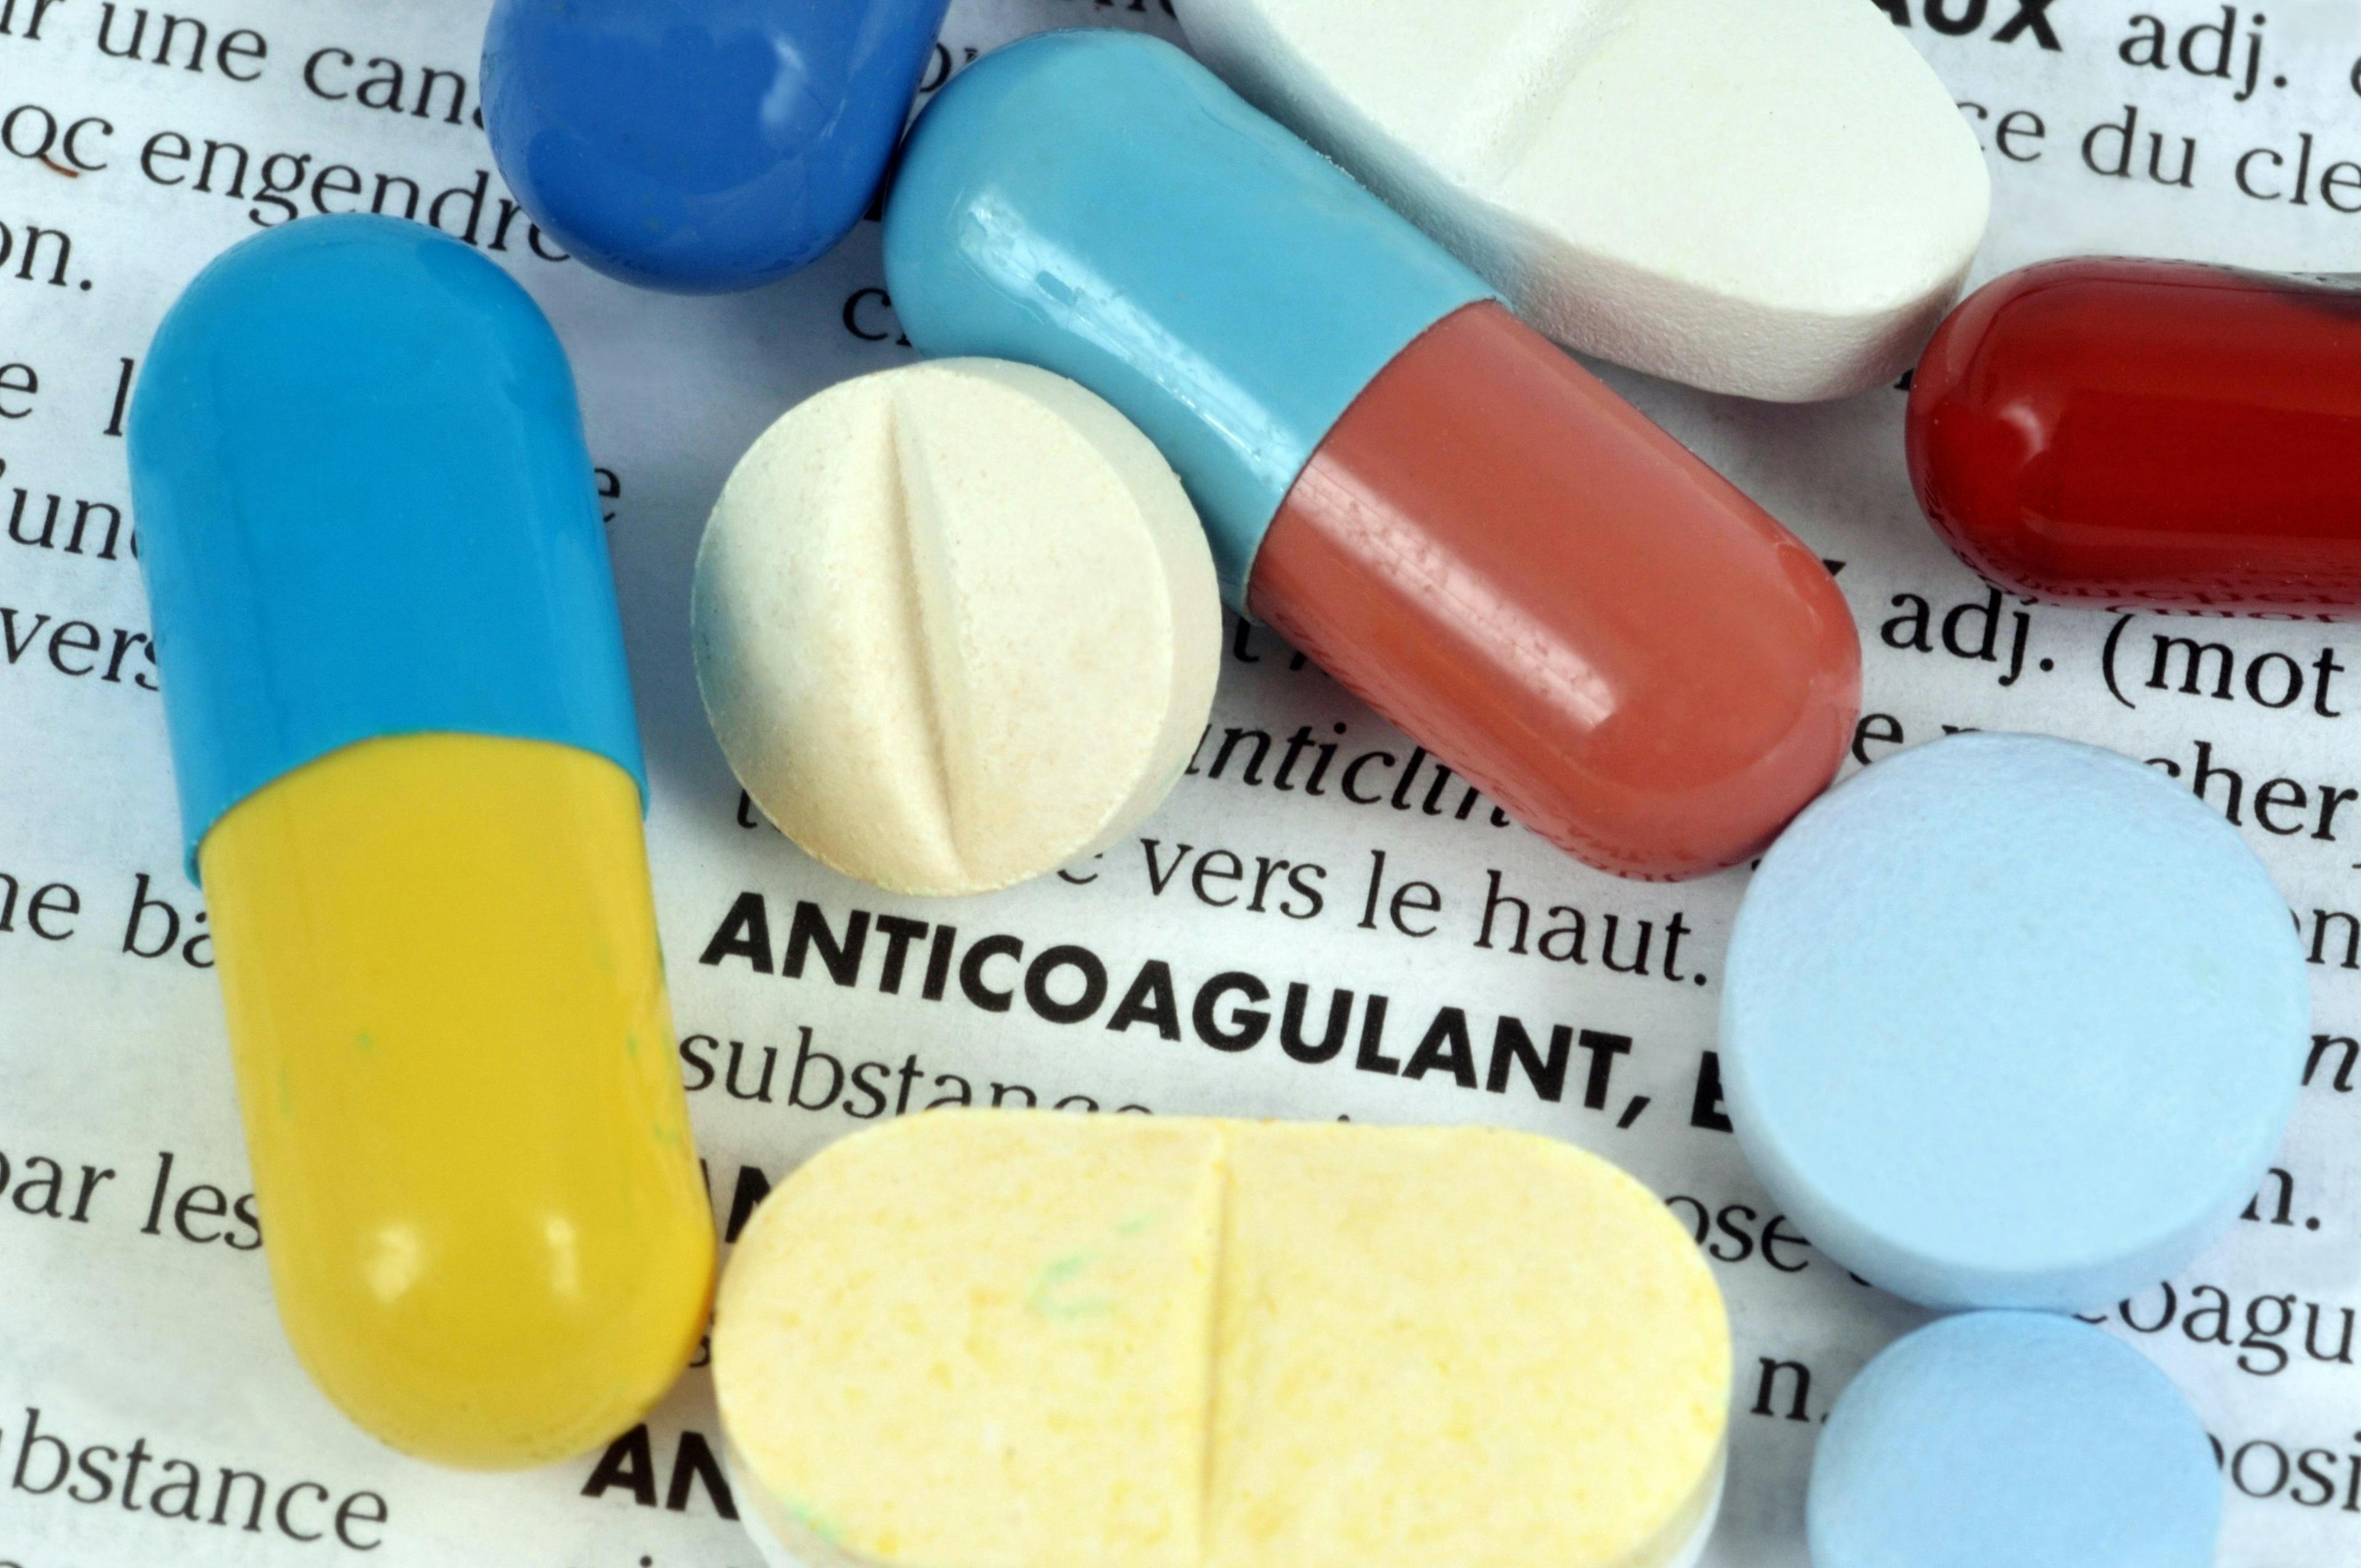 The word anticoagulant surrounded by medications.